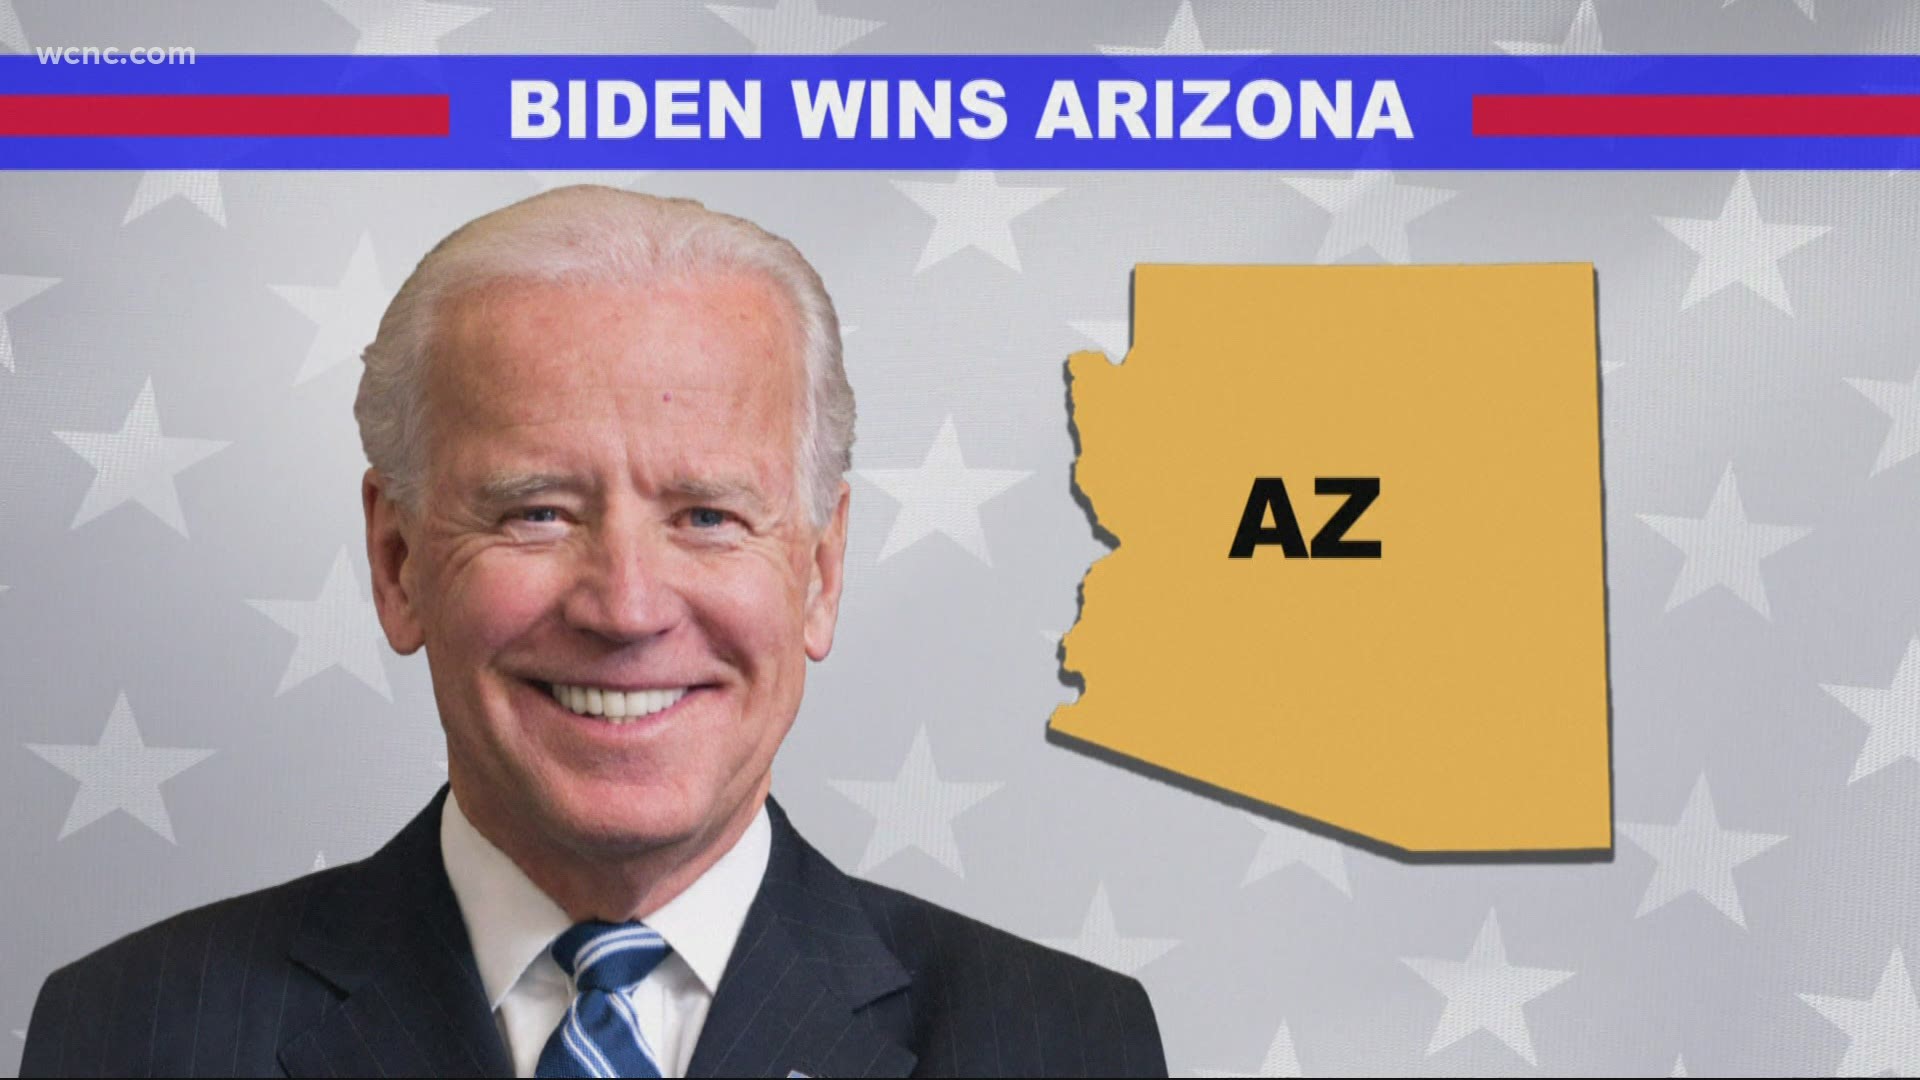 Arizona has been called for President-elect Joe Biden, as he leads President Donald Trump by more votes than ballots remaining to count.